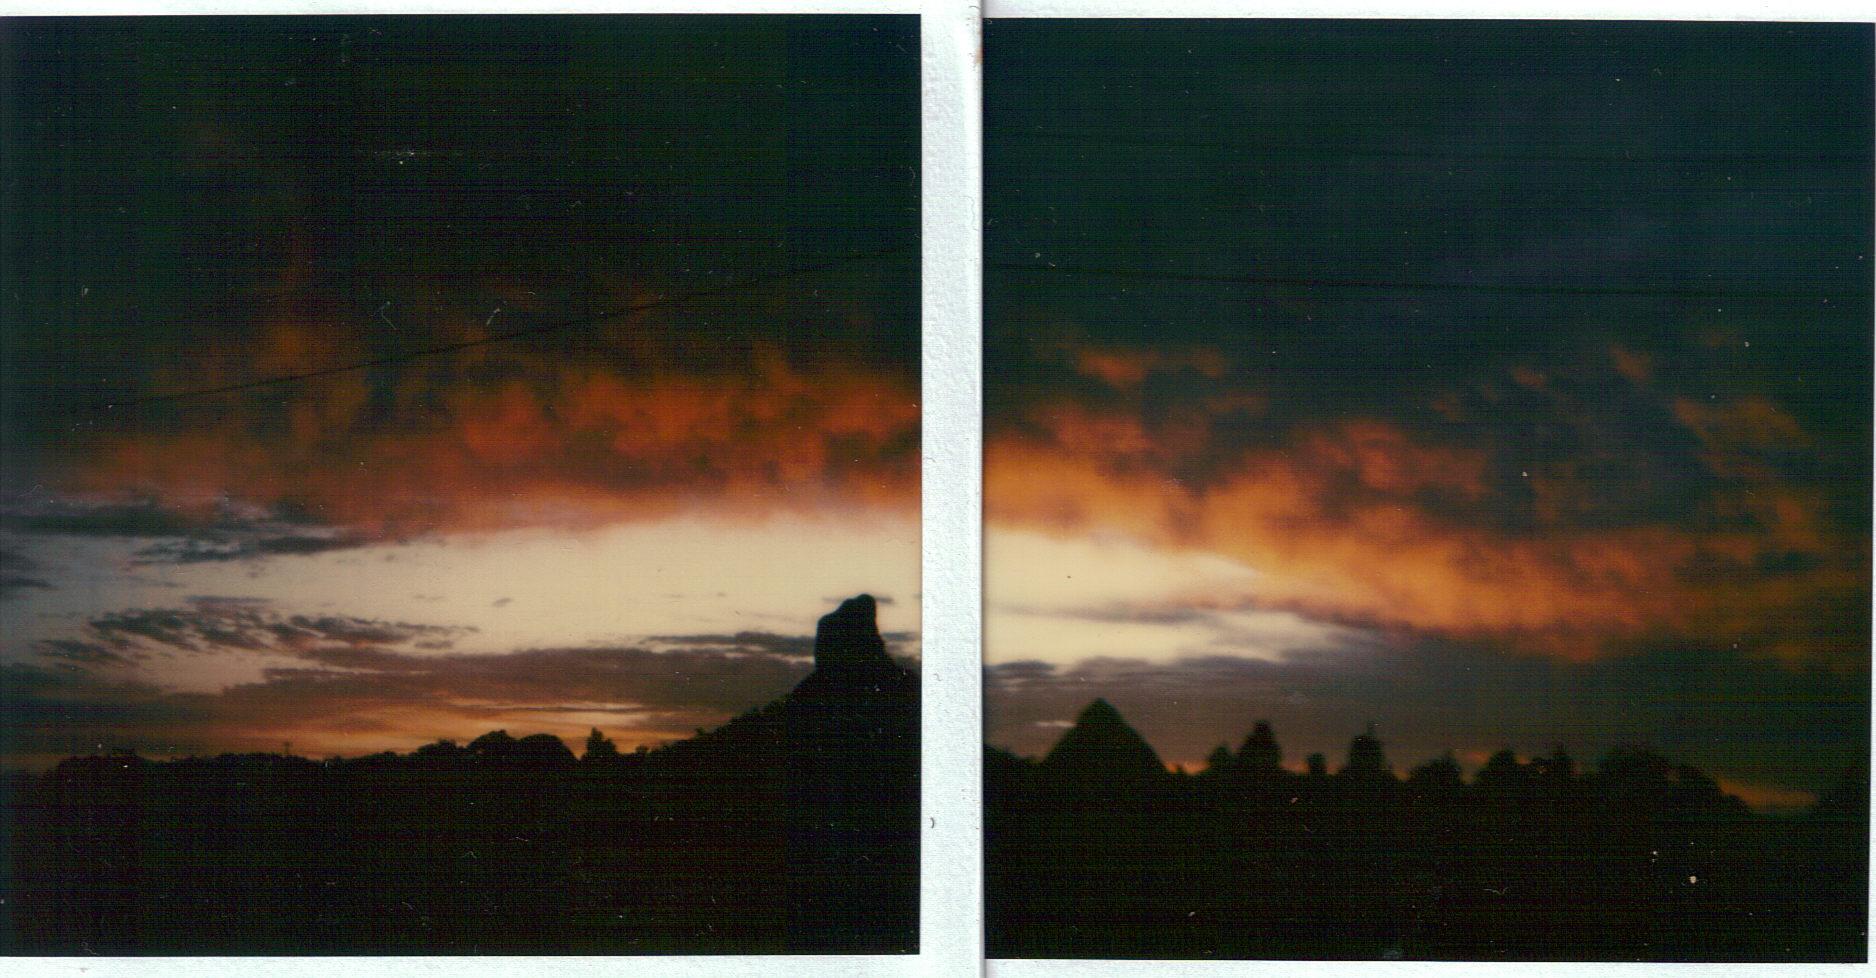 Glasshouse Mts Beerwah & Croockneck I took this pic with a polaroid instamatic, a crap camera,  when I lived and worked here on a pineapple and banana farm in 1983.jpg